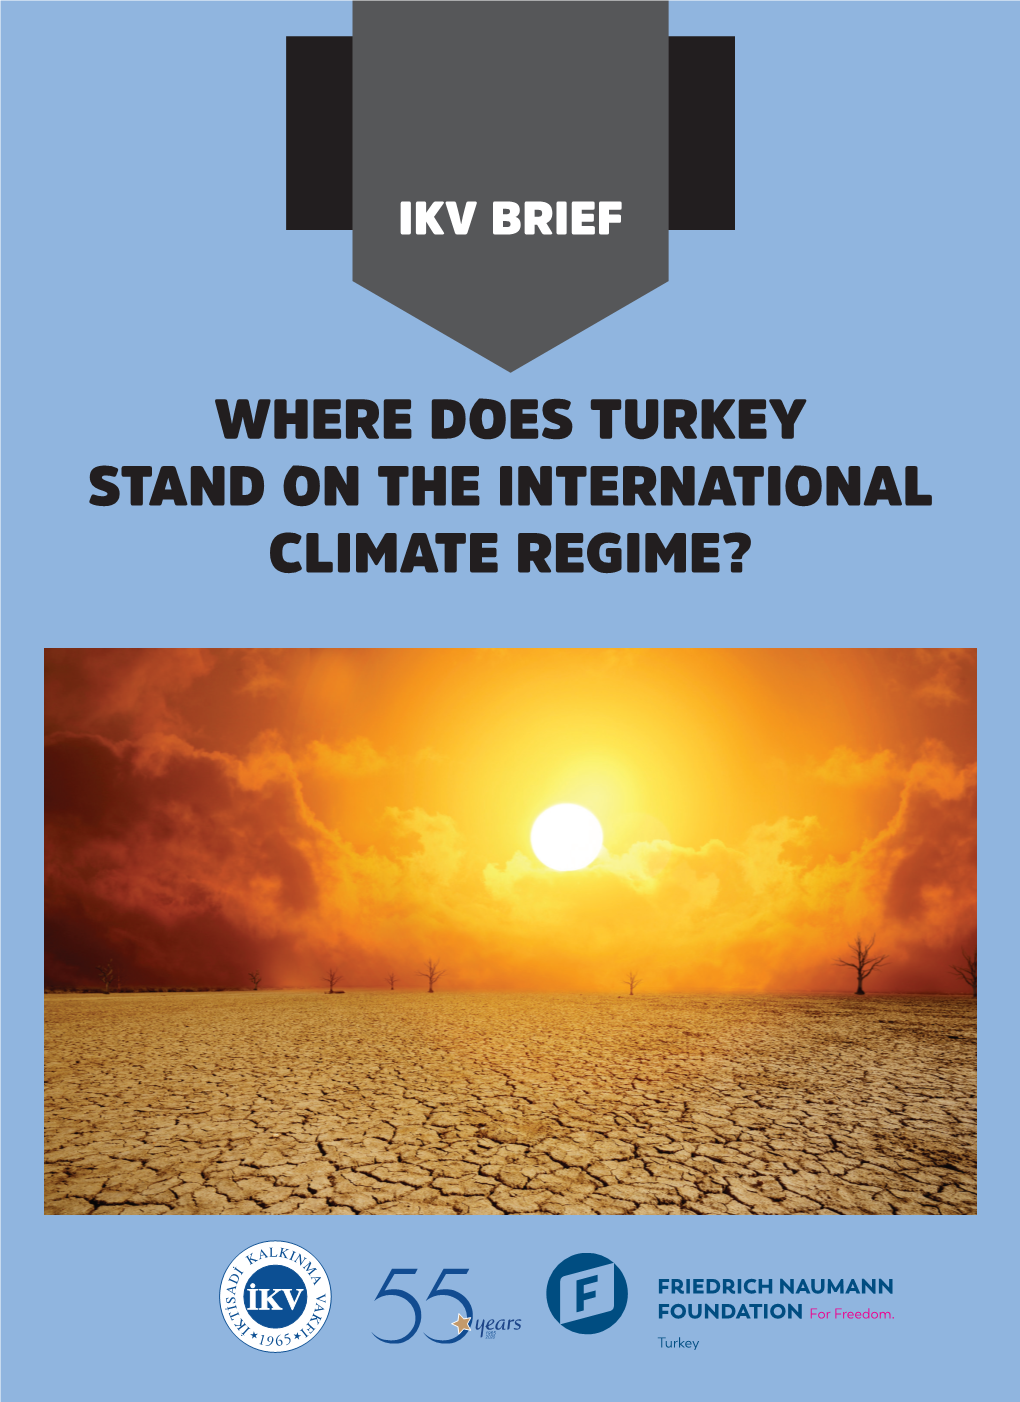 Where Does Turkey Stand on the International Climate Regime?